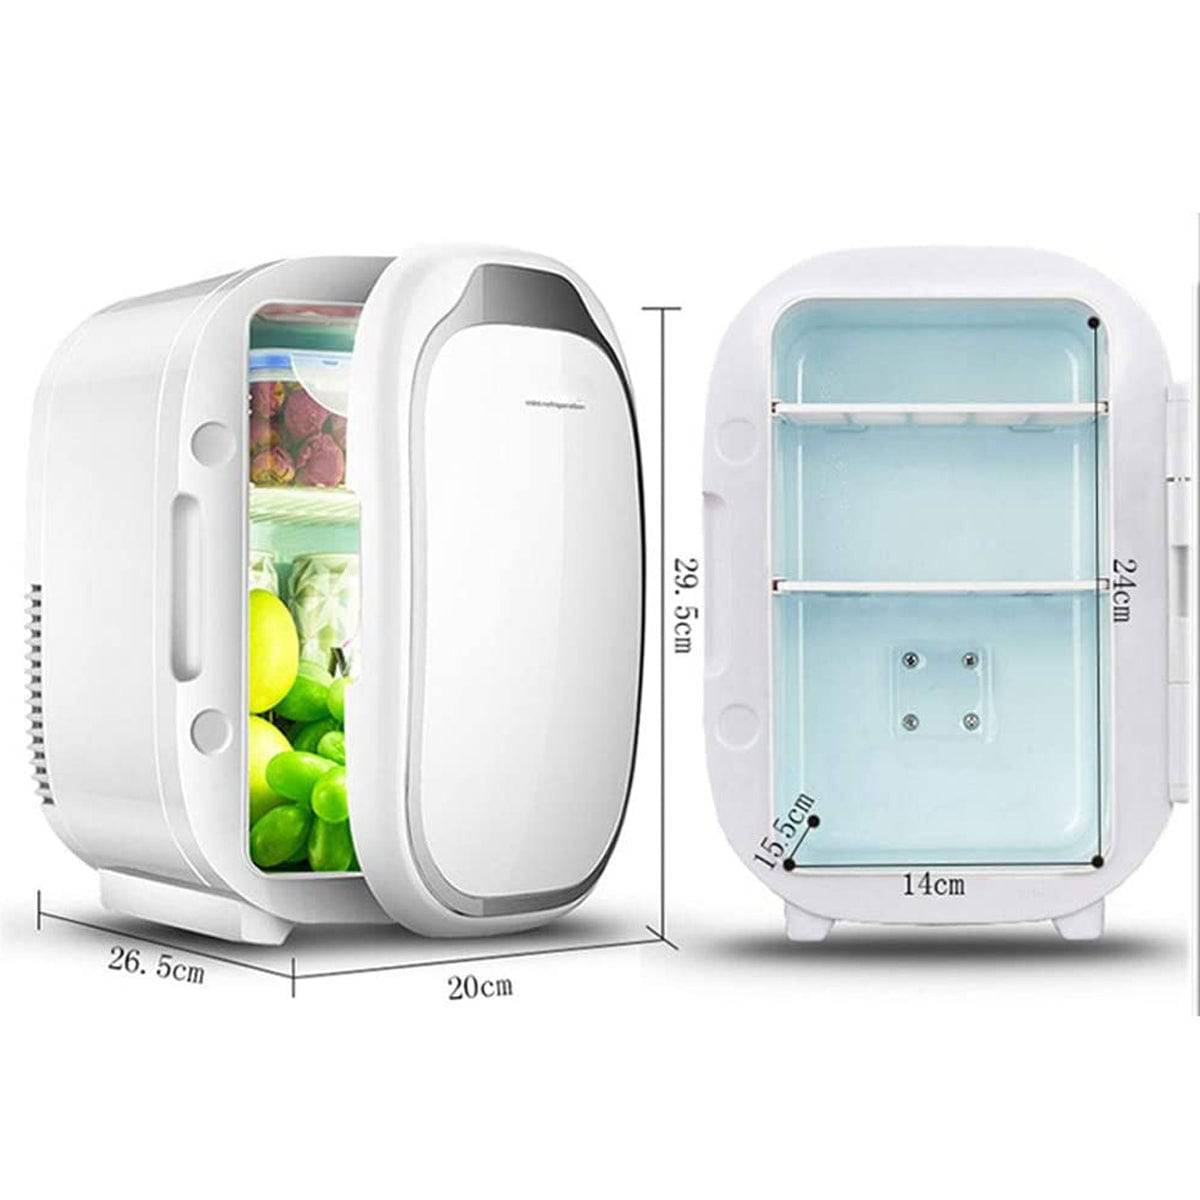 COOLBABY CZBX06 Compact 6L Car and Home Refrigerator - COOLBABY